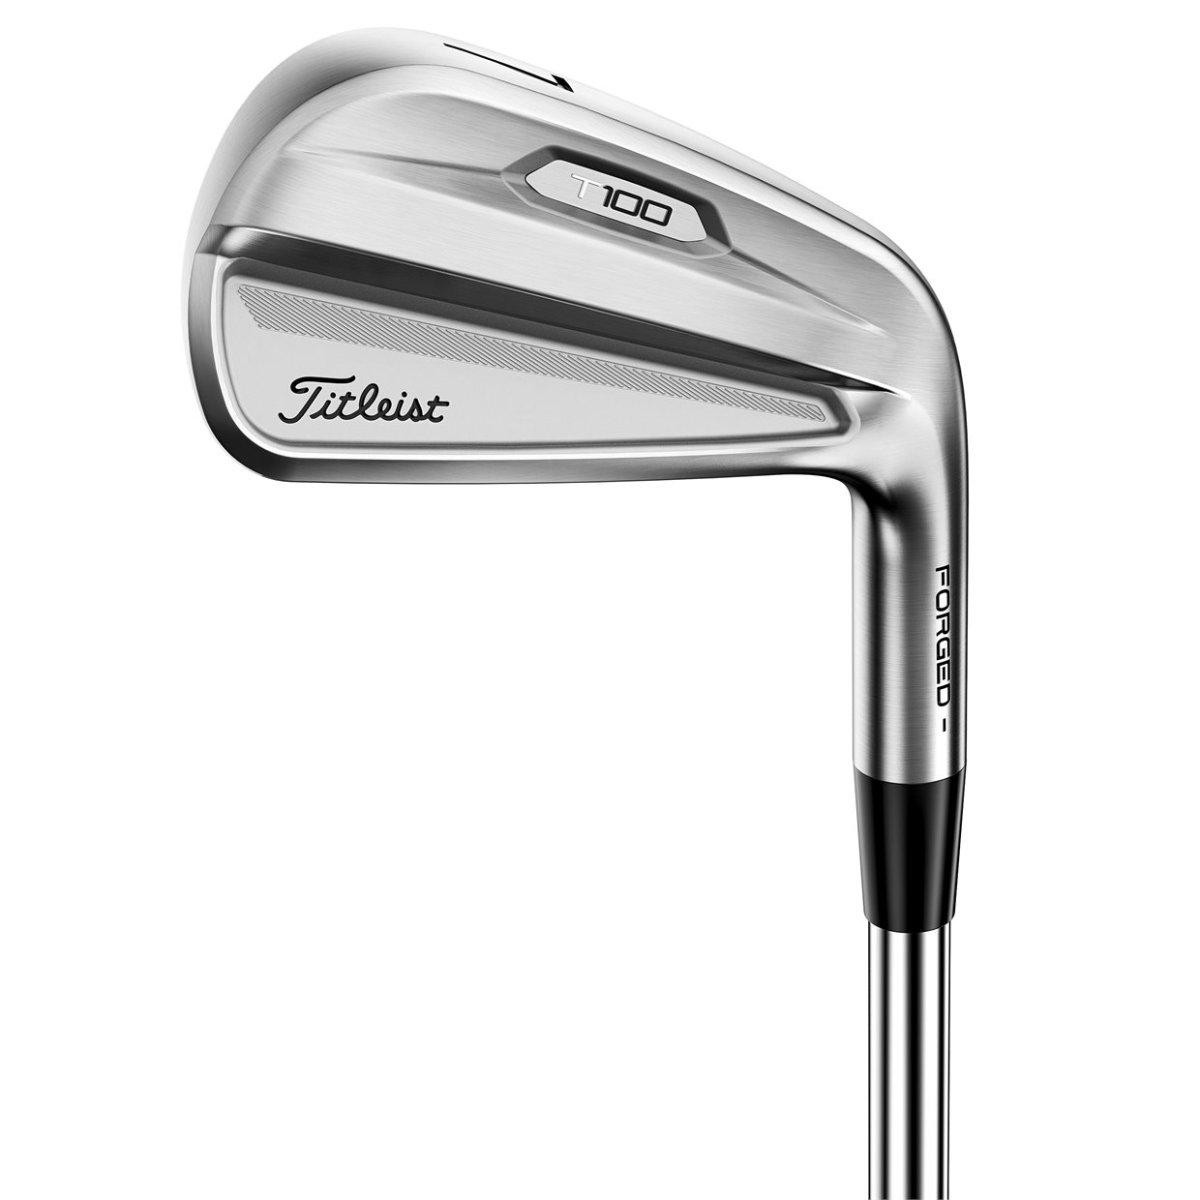 Shop the latest Titleist irons - like the T100 - on Morning Read's online pro shop.